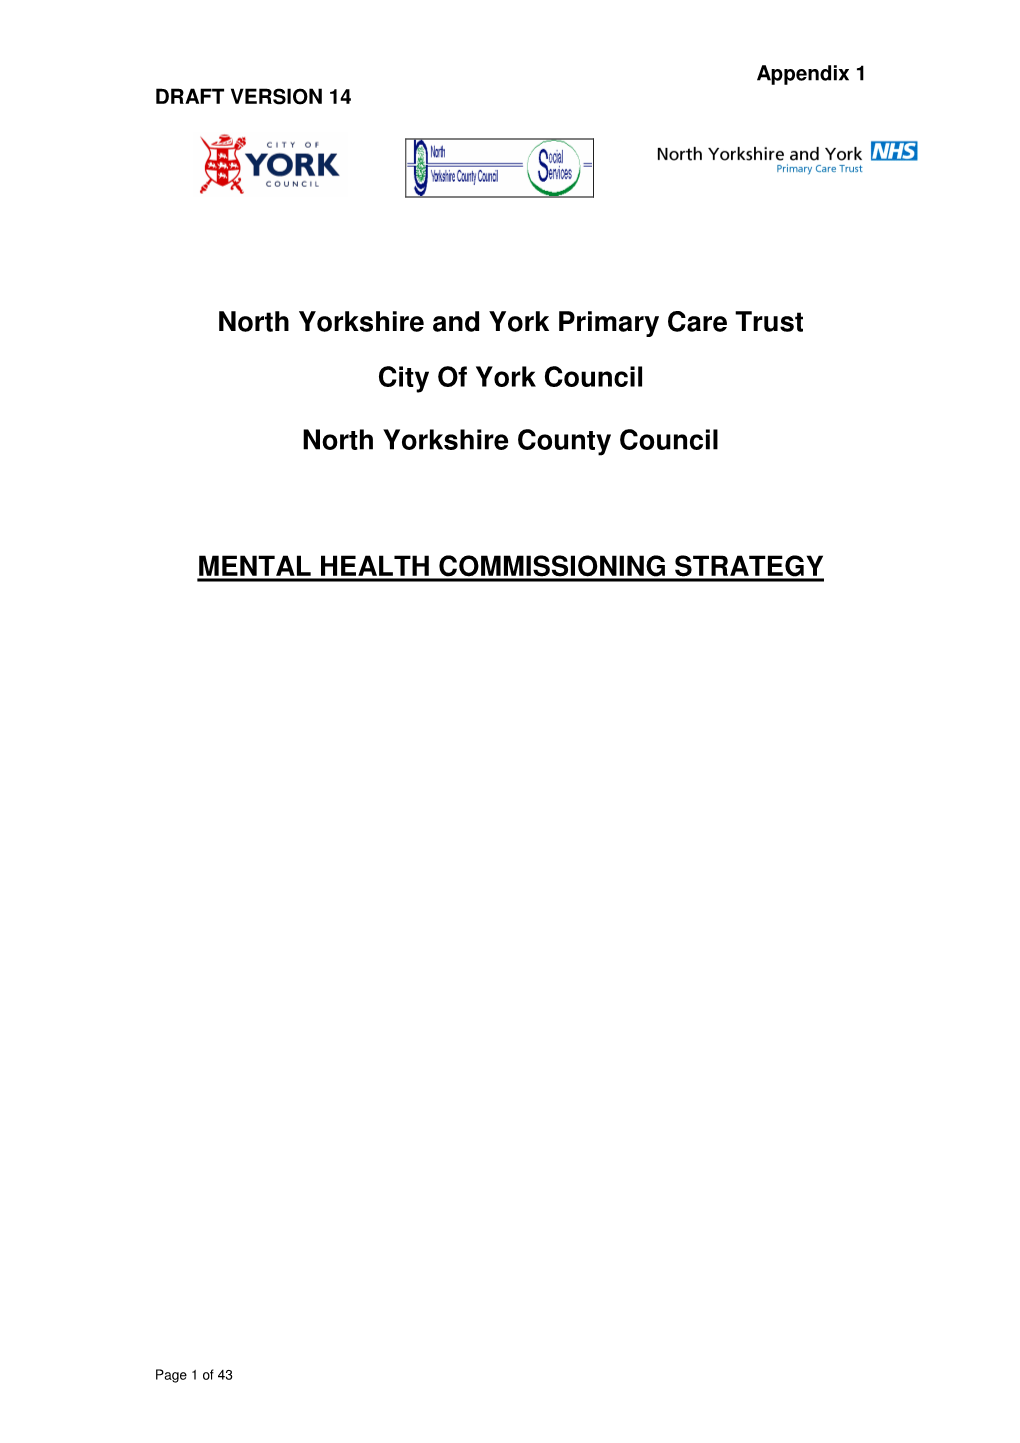 North Yorkshire and York Primary Care Trust City of York Council North Yorkshire County Council MENTAL HEALTH COMMISSIONING